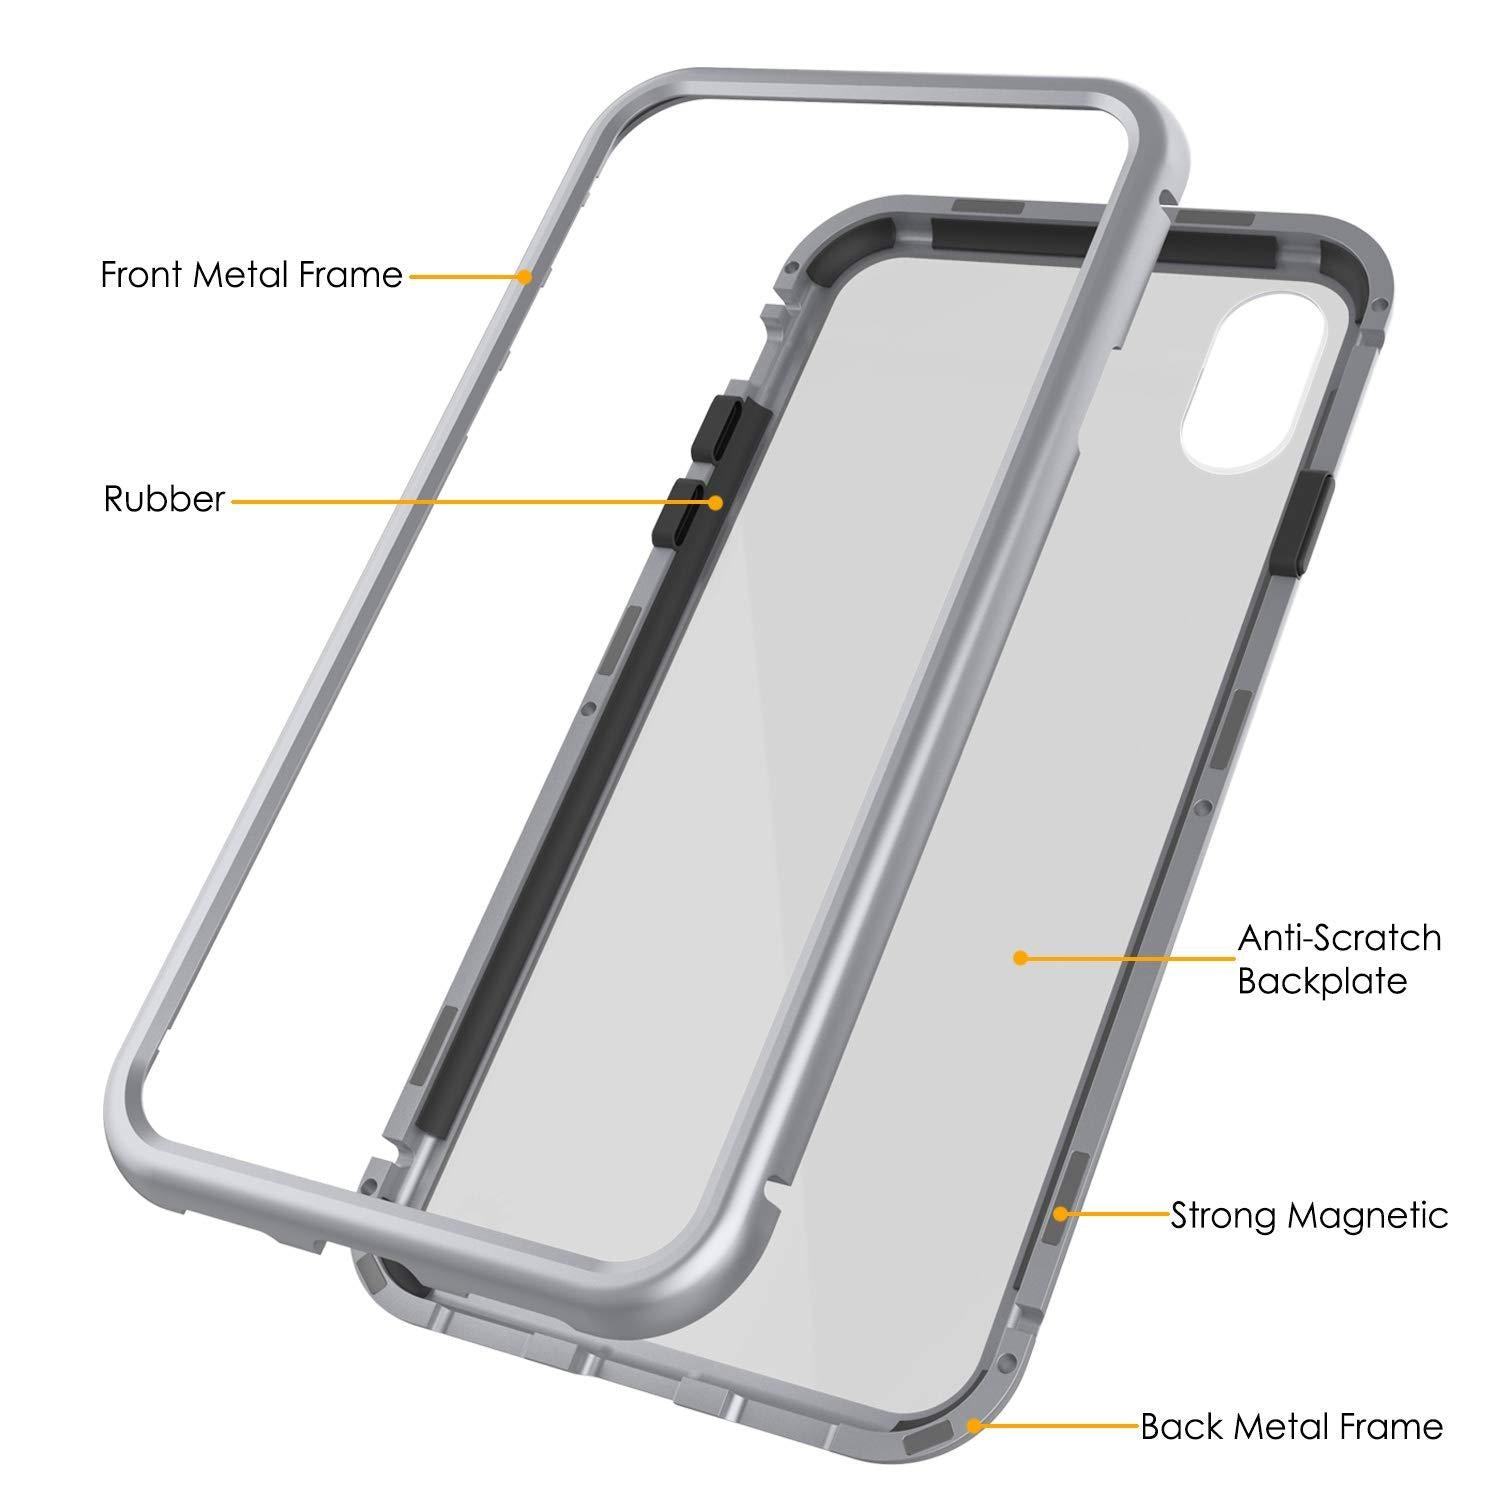 iPhone XS Case, Punkcase Magnetic Shield Protective TPU Cover W/ Tempered Glass Screen Protector [Silver]